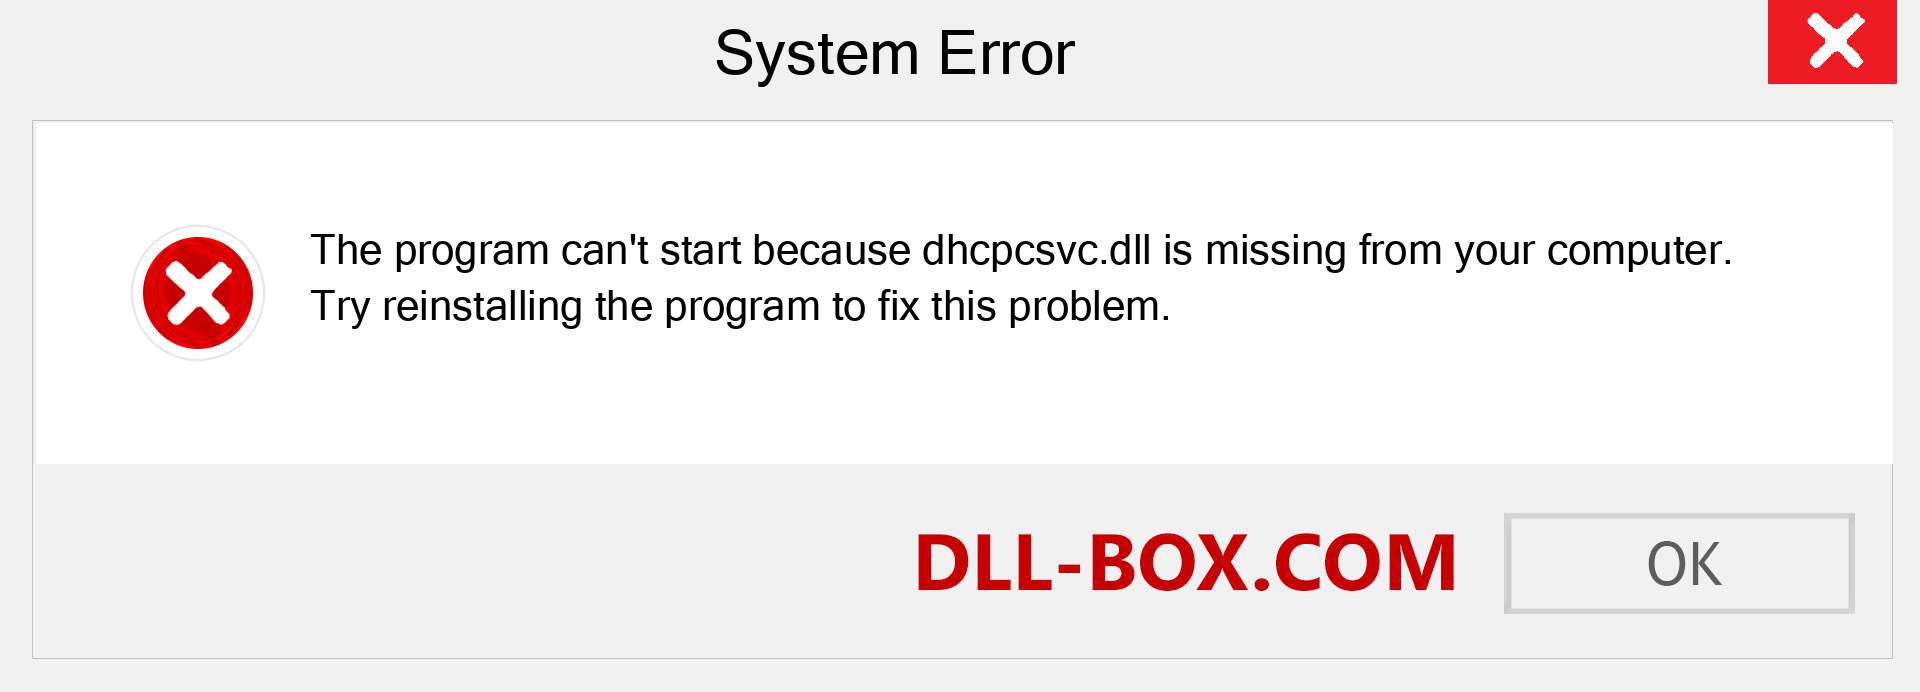  dhcpcsvc.dll file is missing?. Download for Windows 7, 8, 10 - Fix  dhcpcsvc dll Missing Error on Windows, photos, images